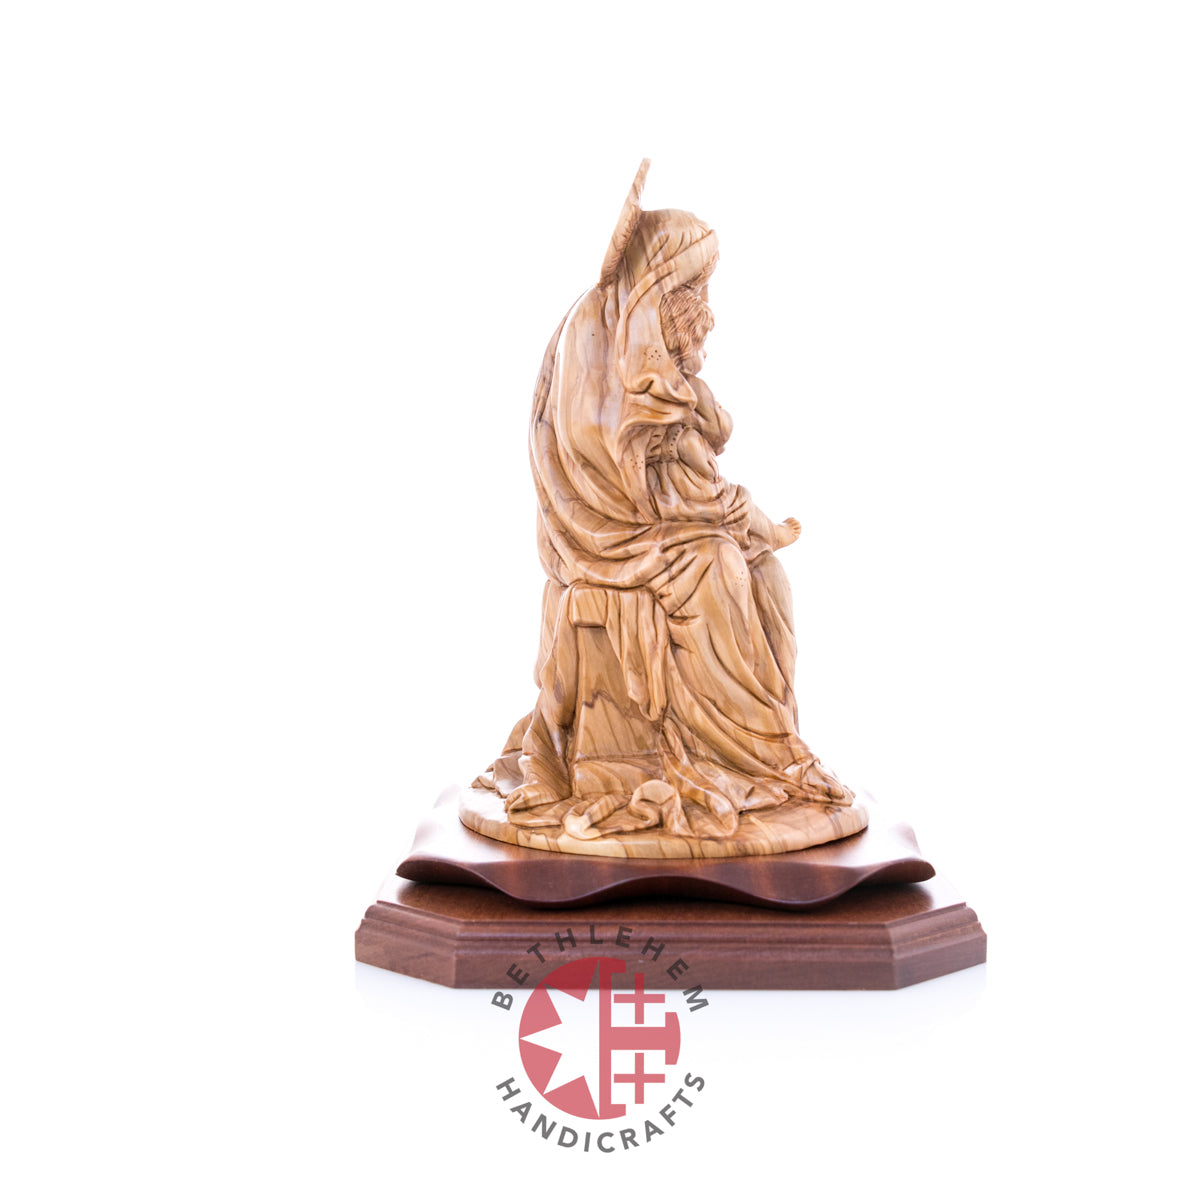 Crowned Virgin Mary with Baby Jesus, 11" Olive Wood Carving Statue from Bethlehem